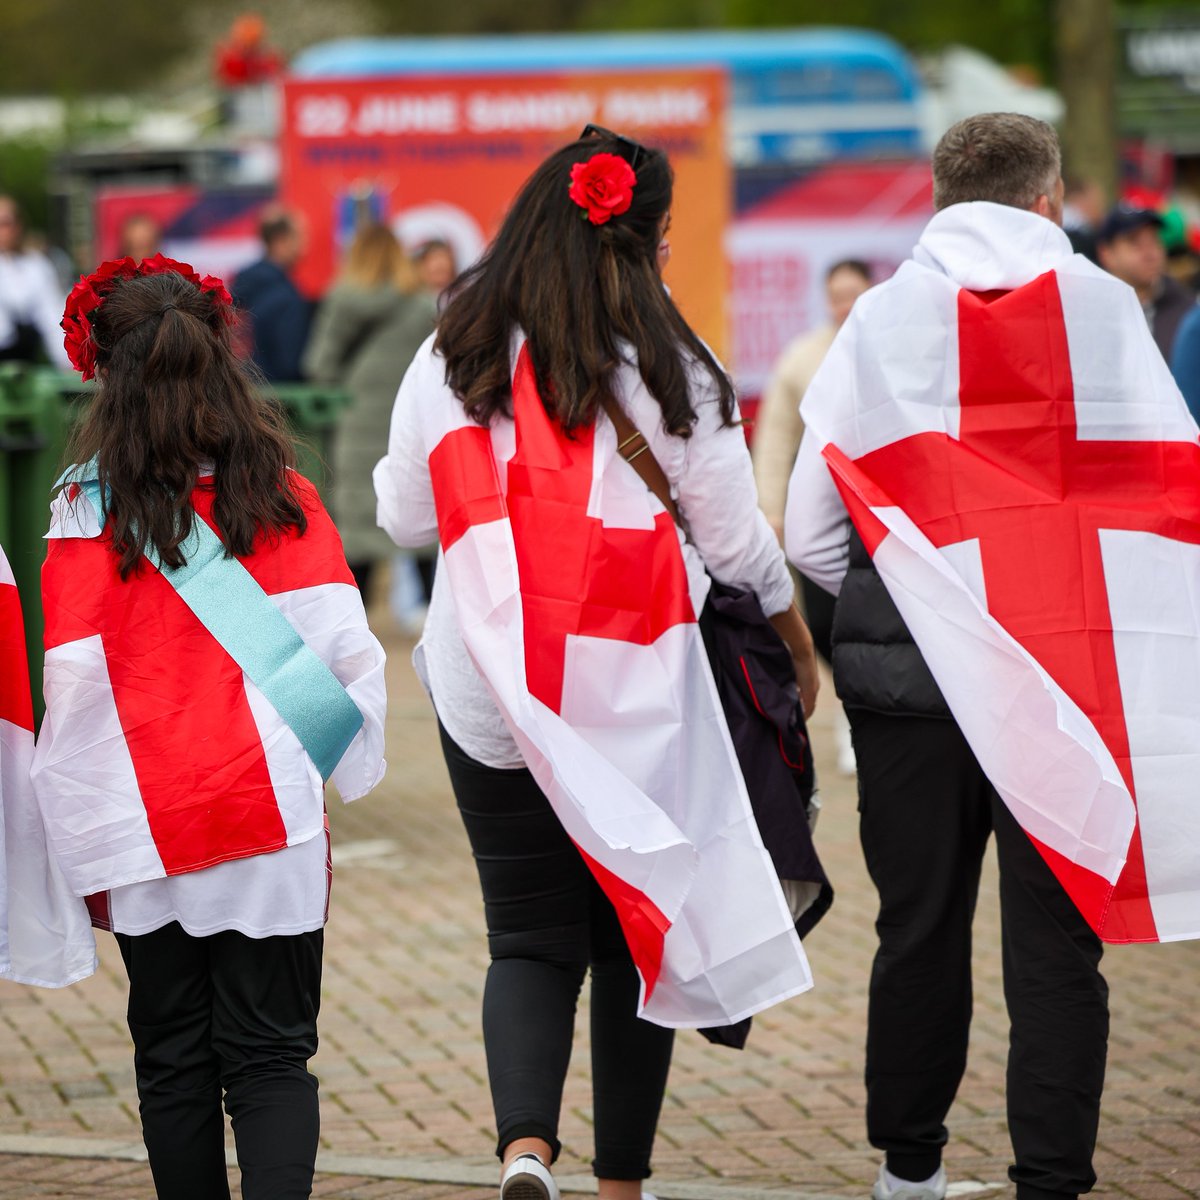 Happy St George's Day from everyone at England Rugby 🌹💖 #StGeorgesDay